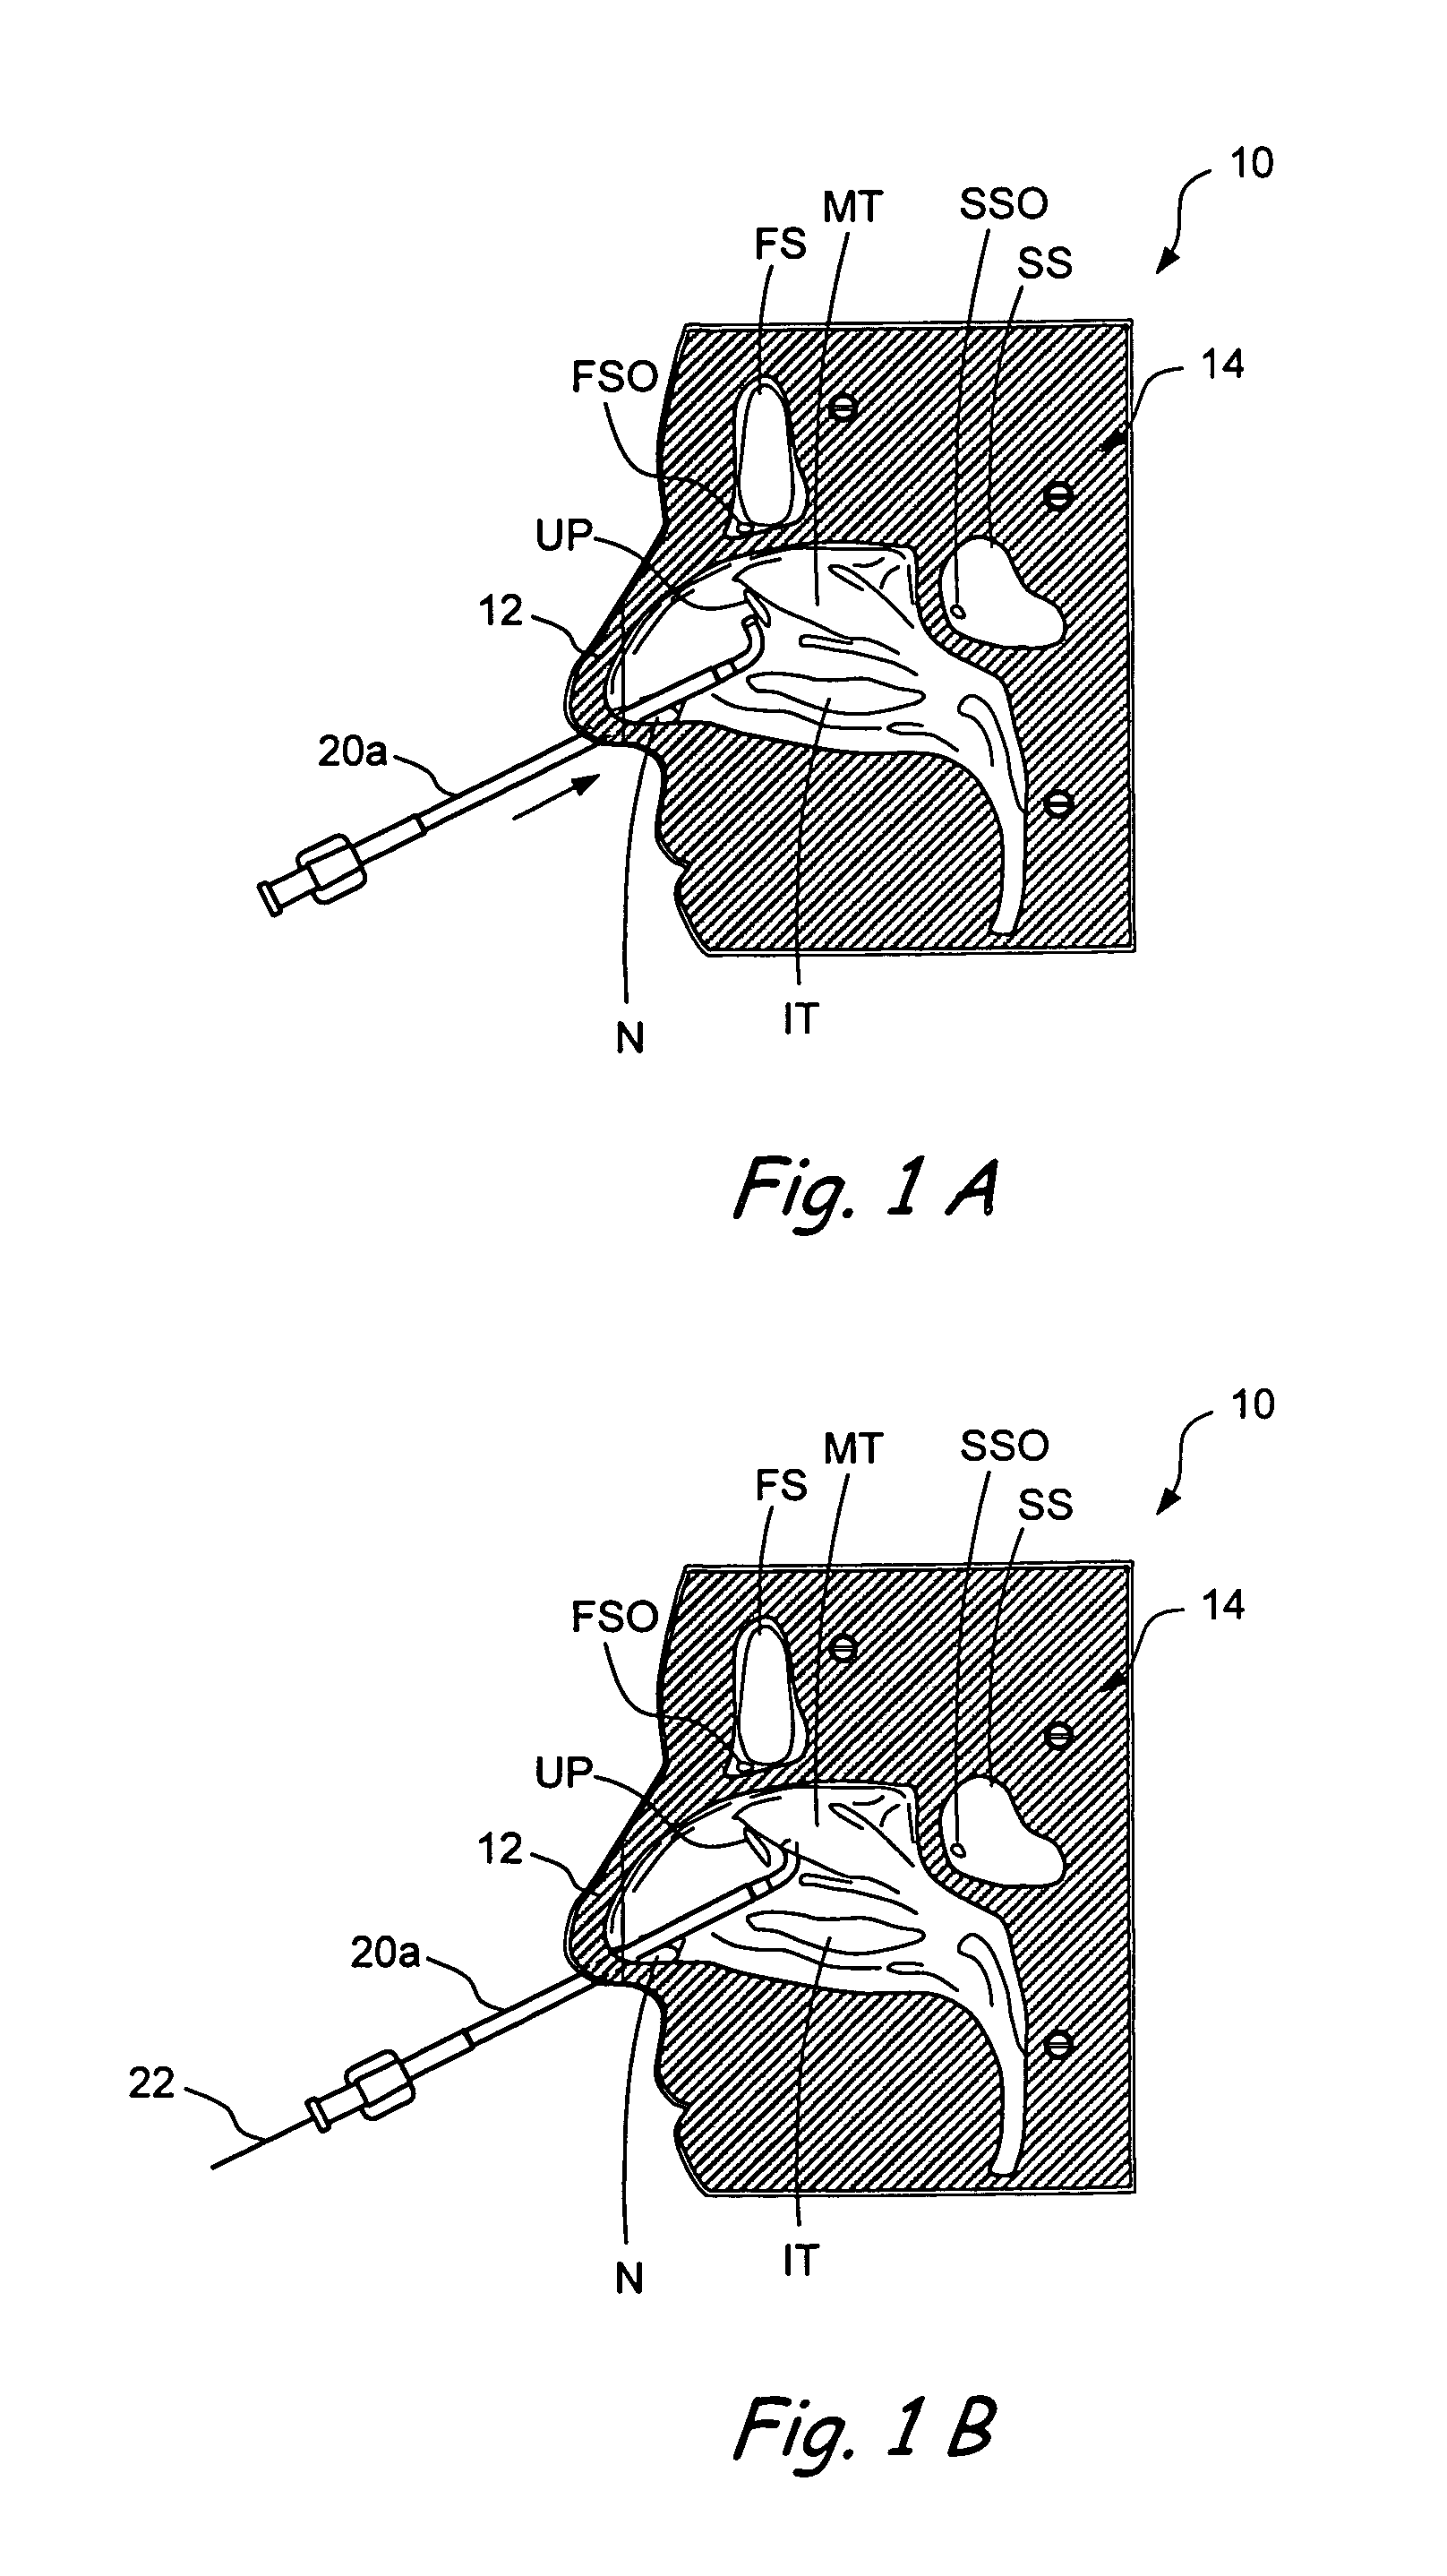 Anatomical models and methods for training and demonstration of medical procedures